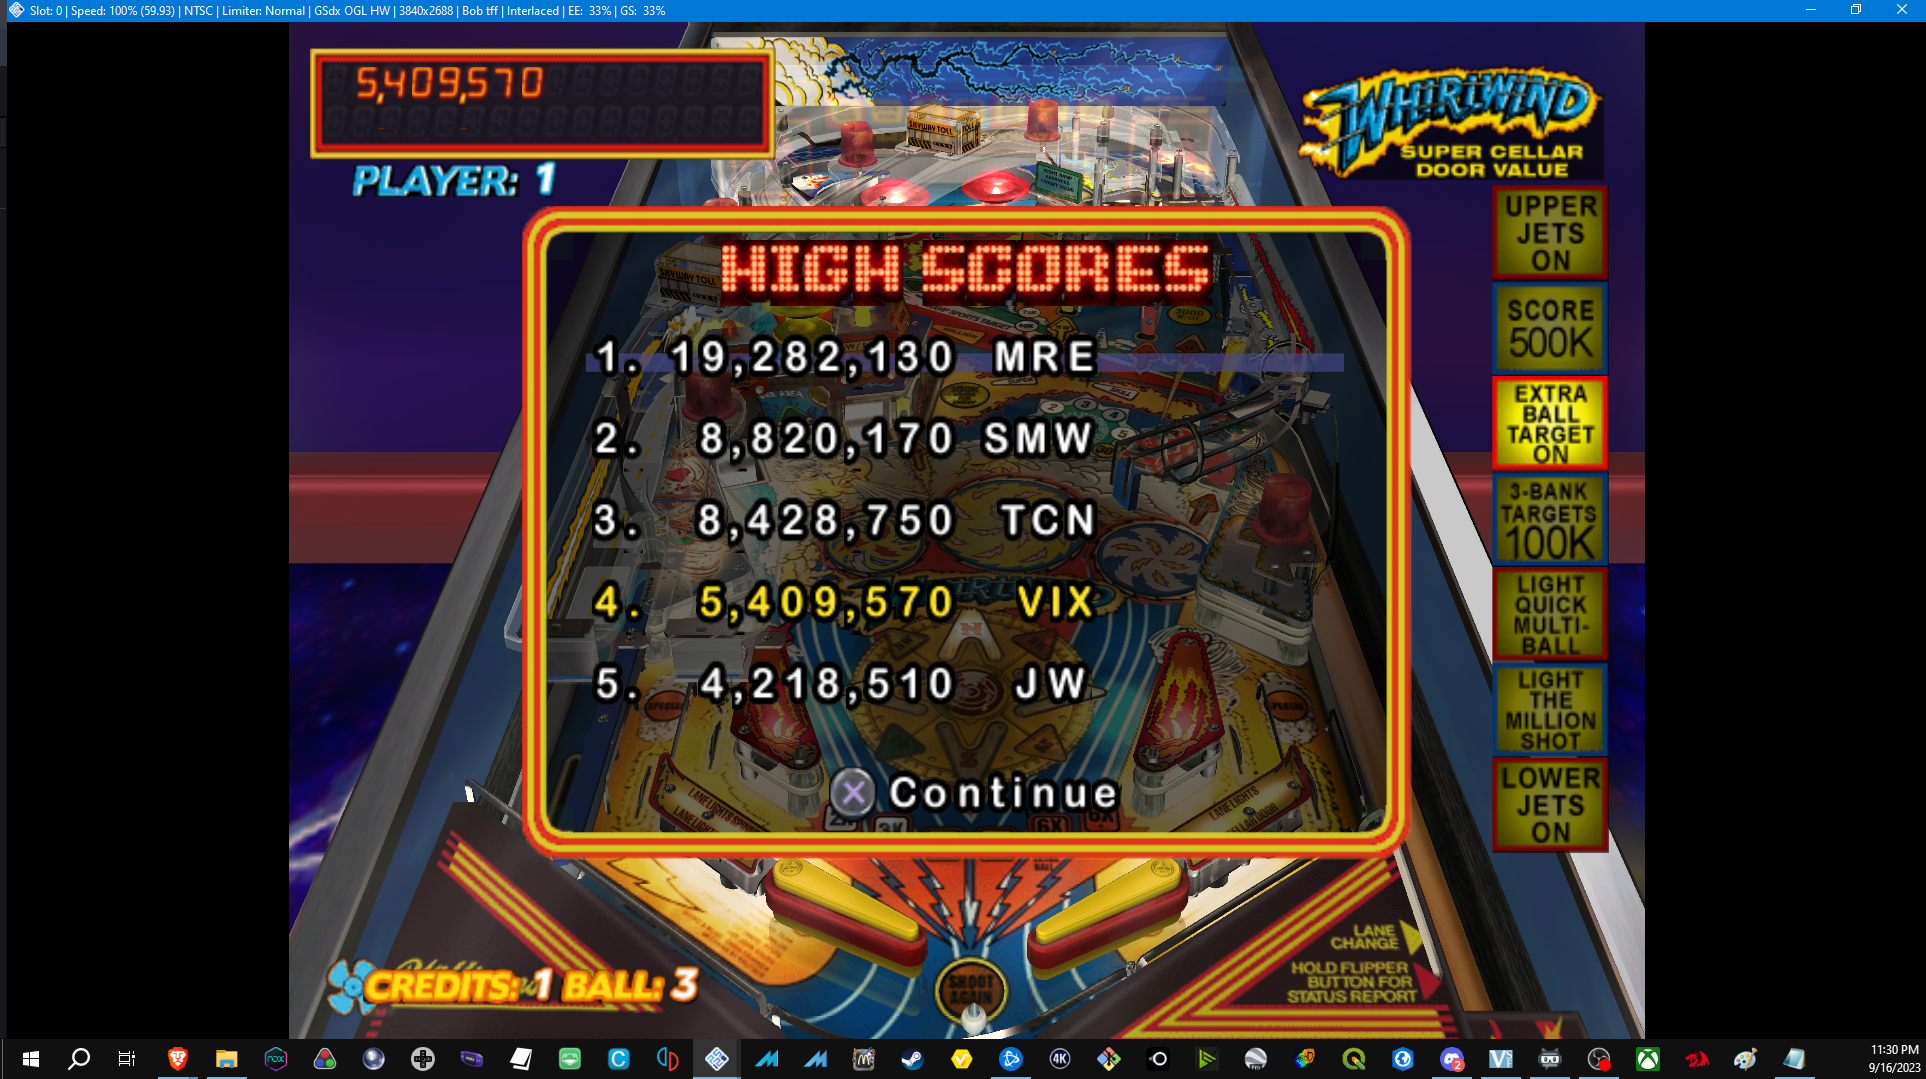 Pinball Hall of Fame: The Williams Collection: Whirlwind 5,409,570 points